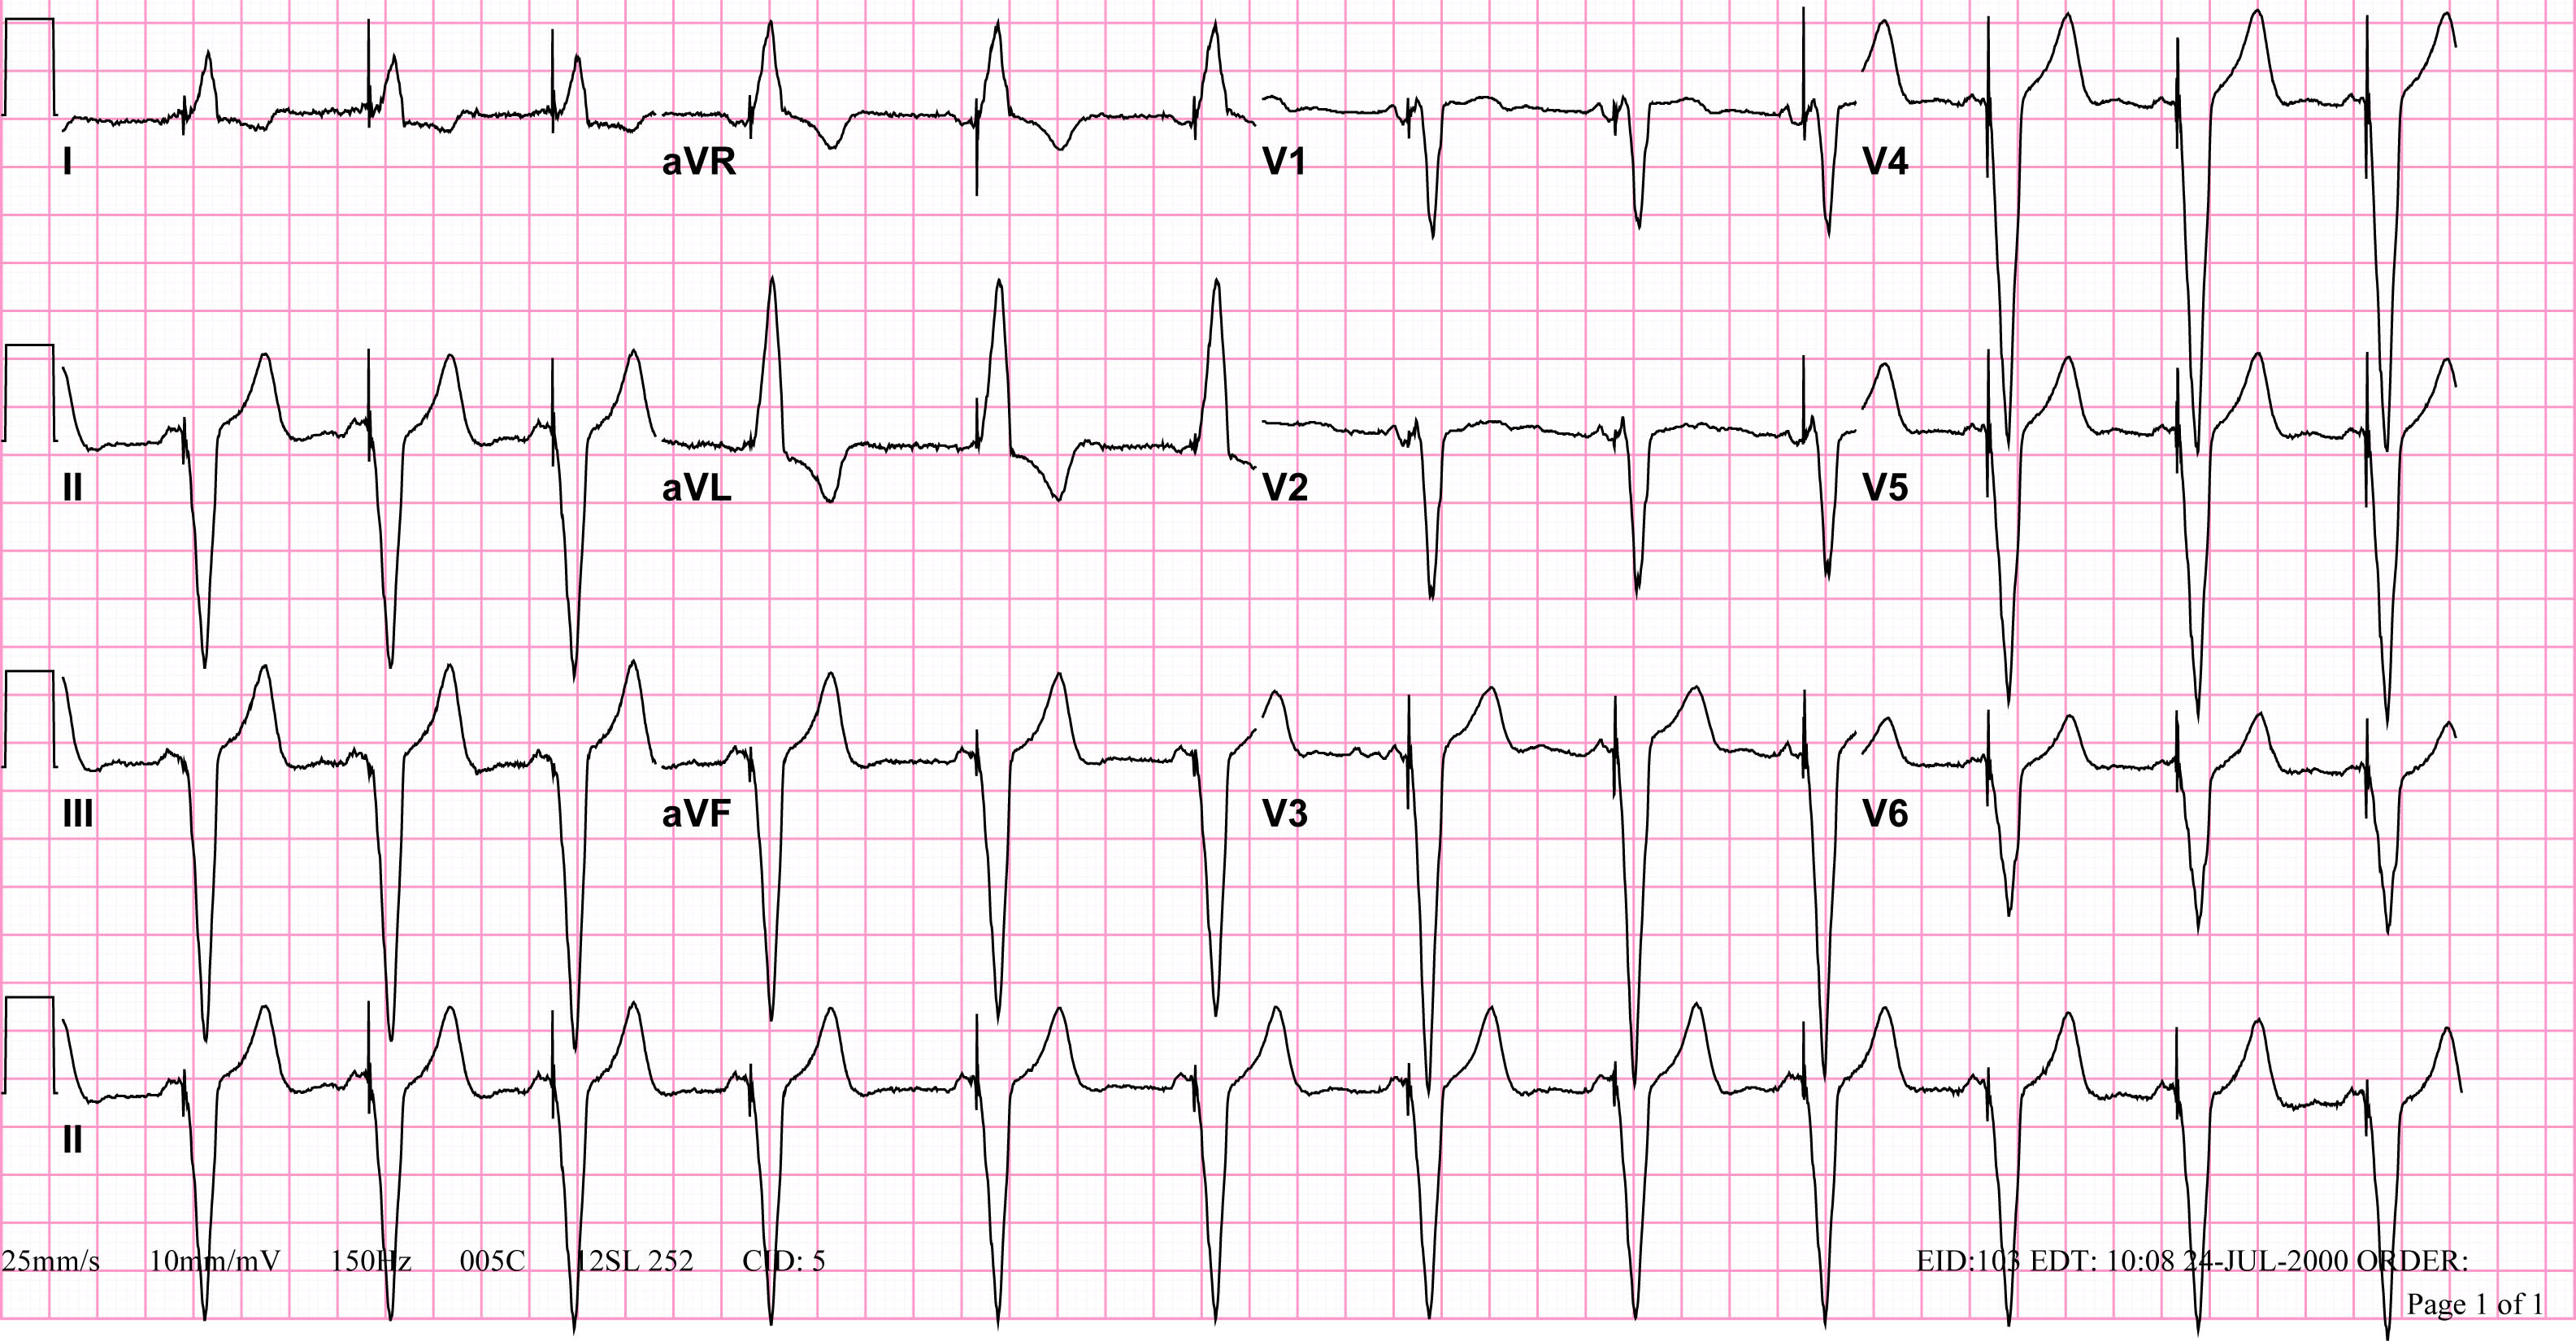 VVI pacemaker rhythm. Note the LBBB morphology with left axis deviation indicating the pacing lead in the right ventricular apex.